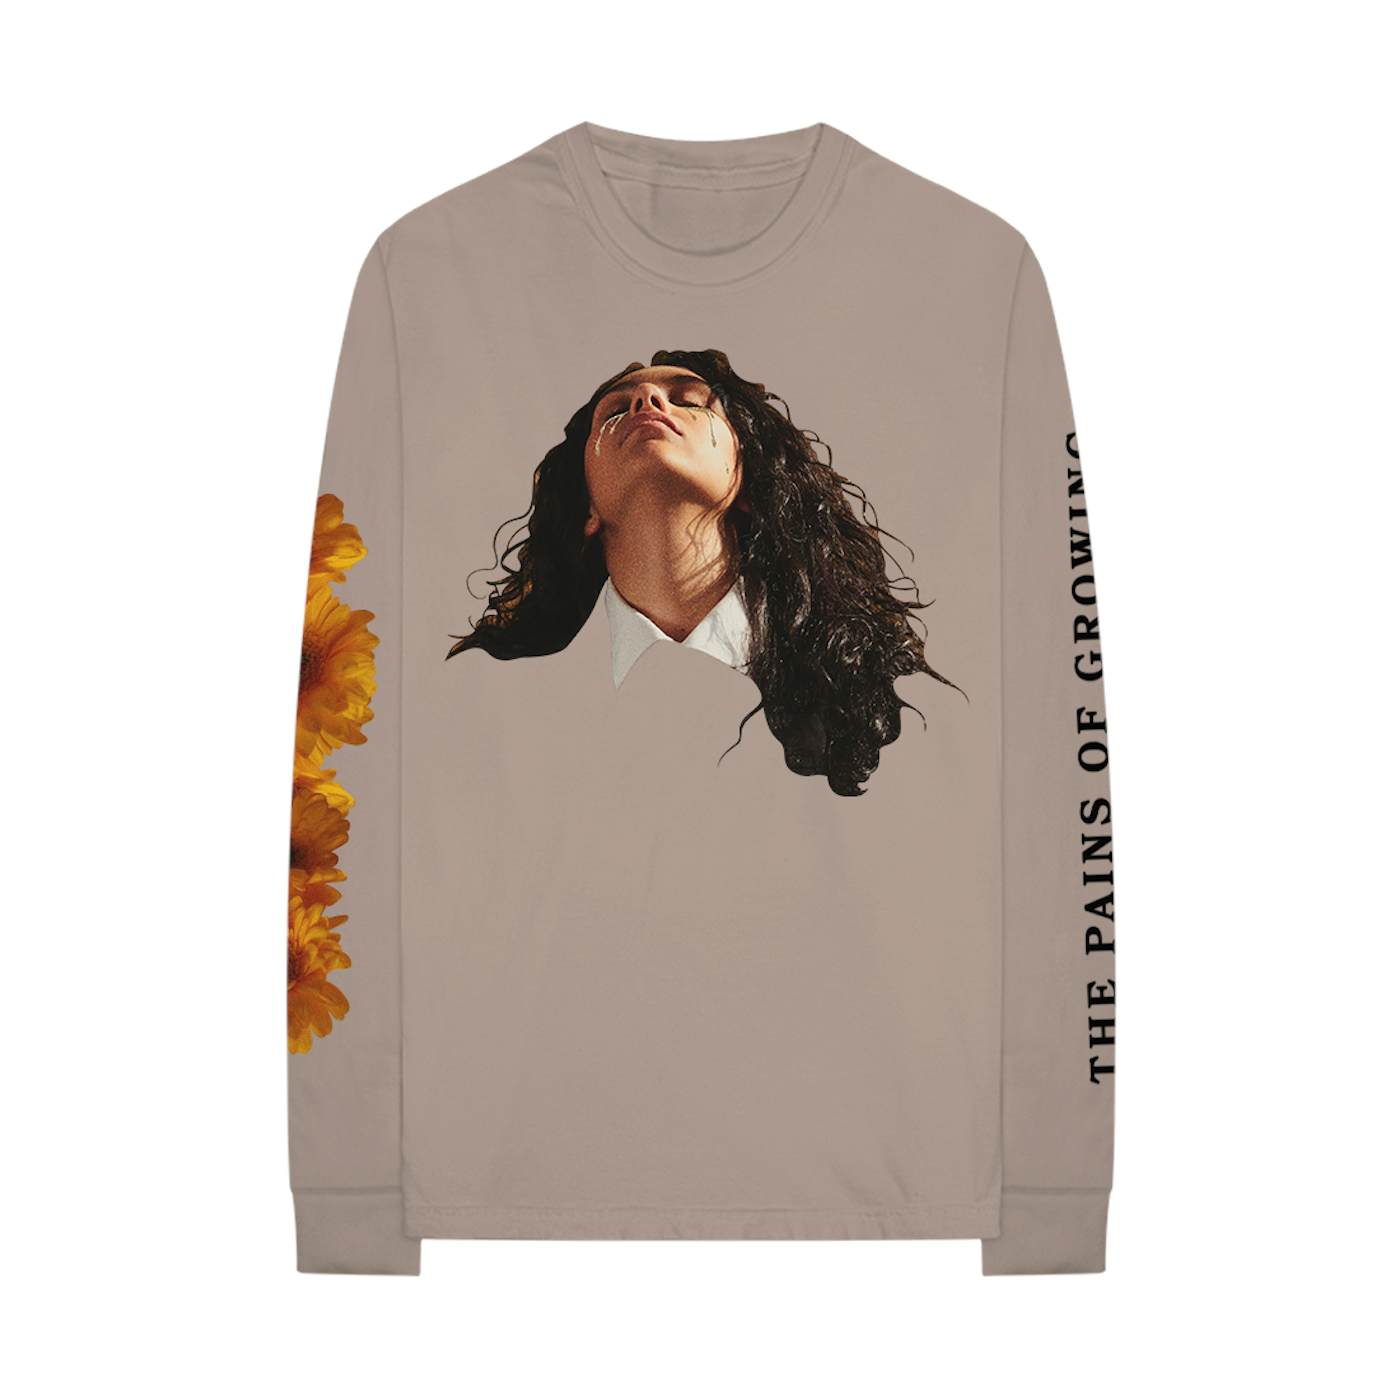 Alessia Cara 'The Pains Of Growing' L/S